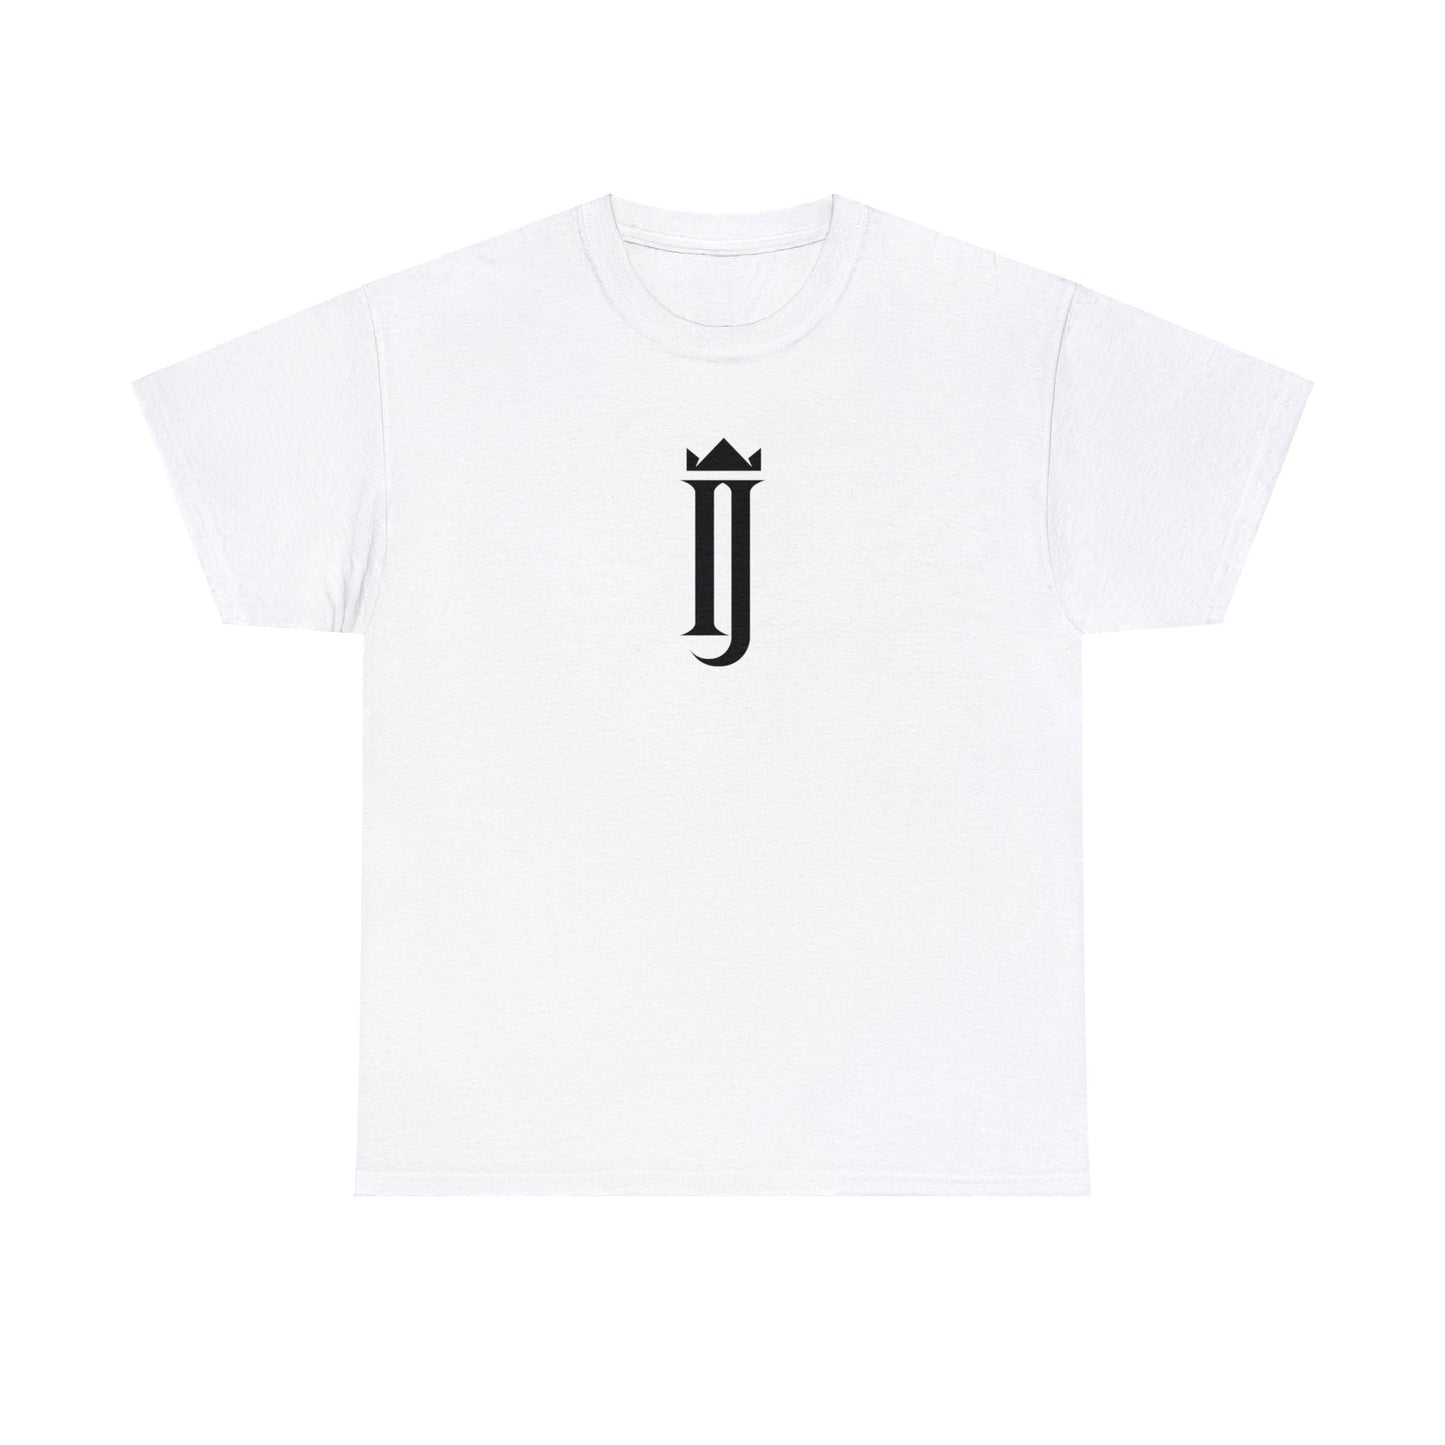 Isaiah Jacobs "IJ" Double Sided Tee